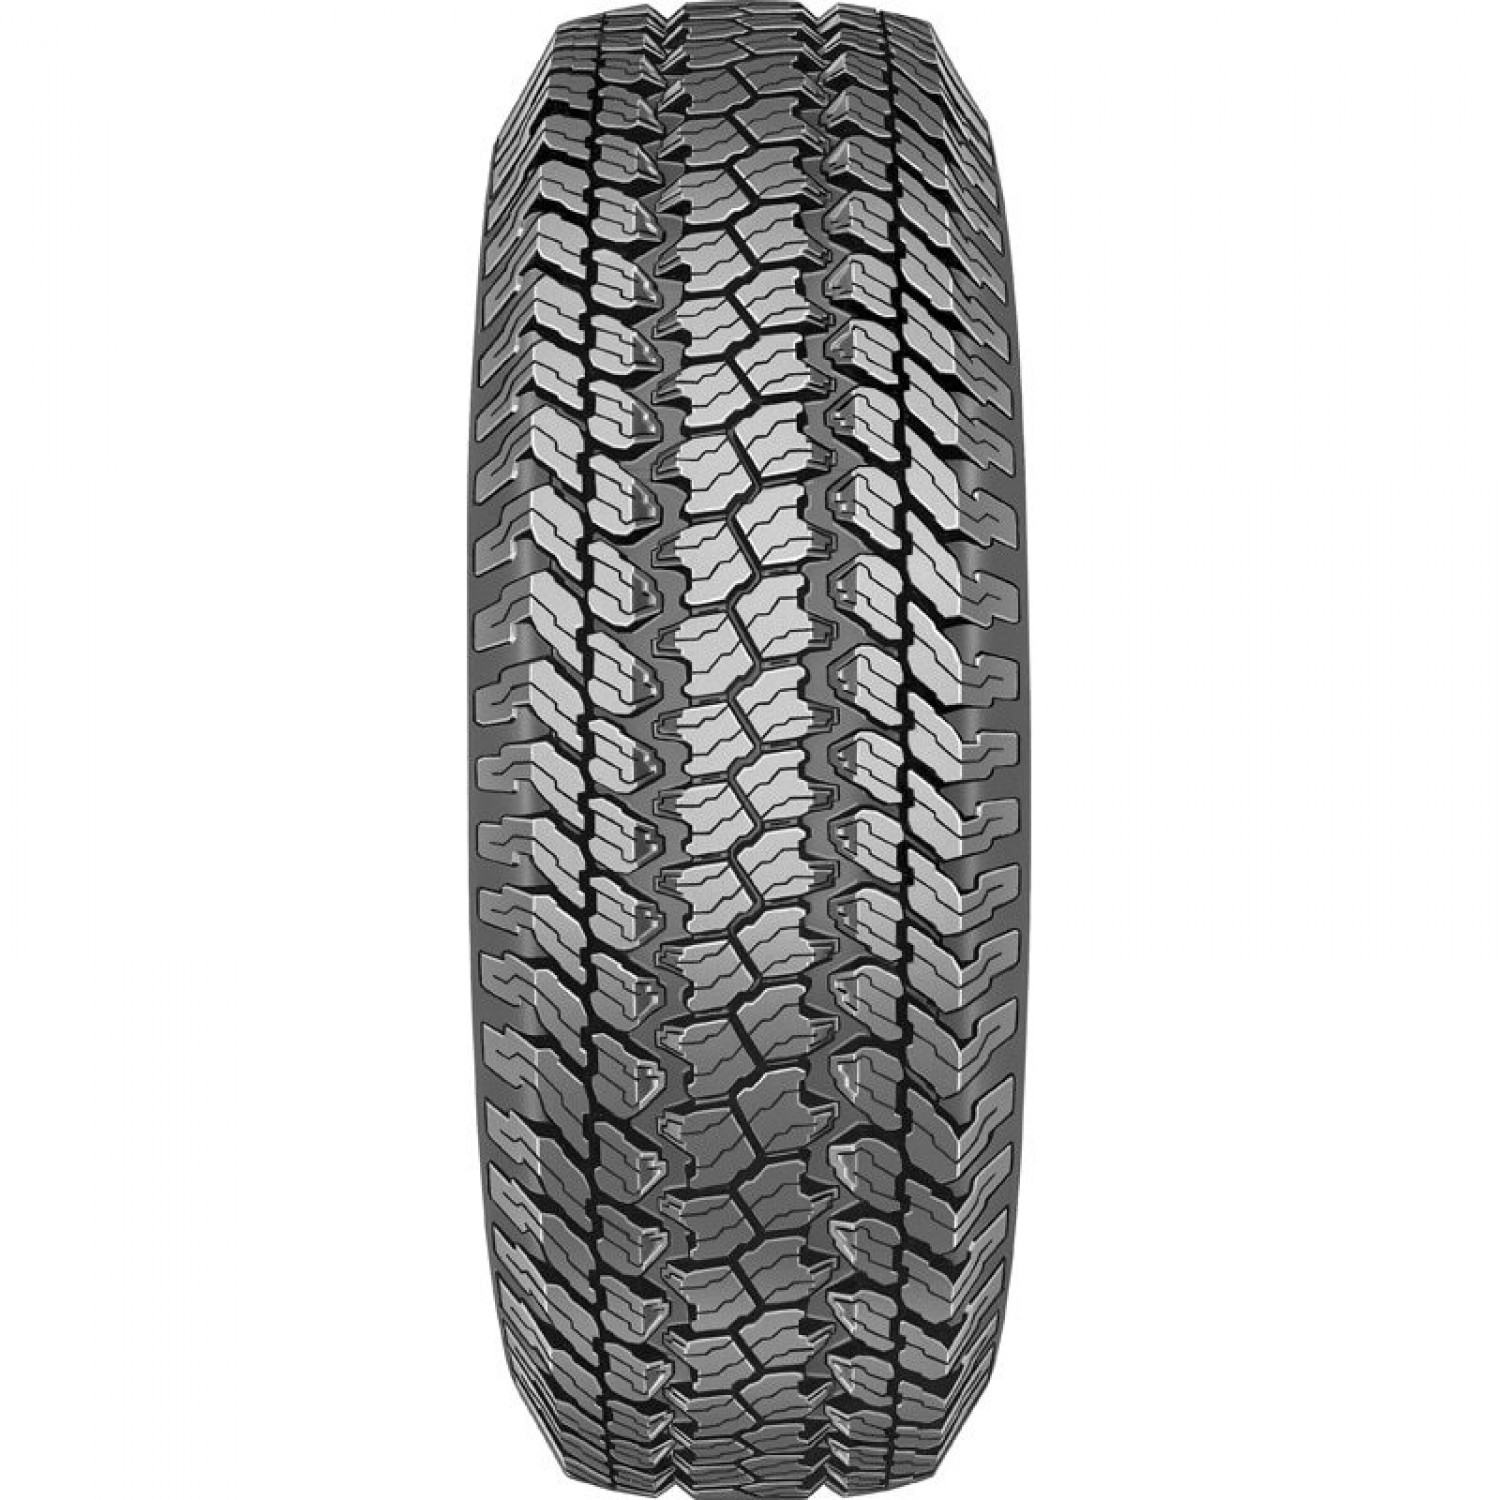 Goodyear Wrangler Territory AT/S Outlined White Letters Tire (265/70R18  116T) vzn121414